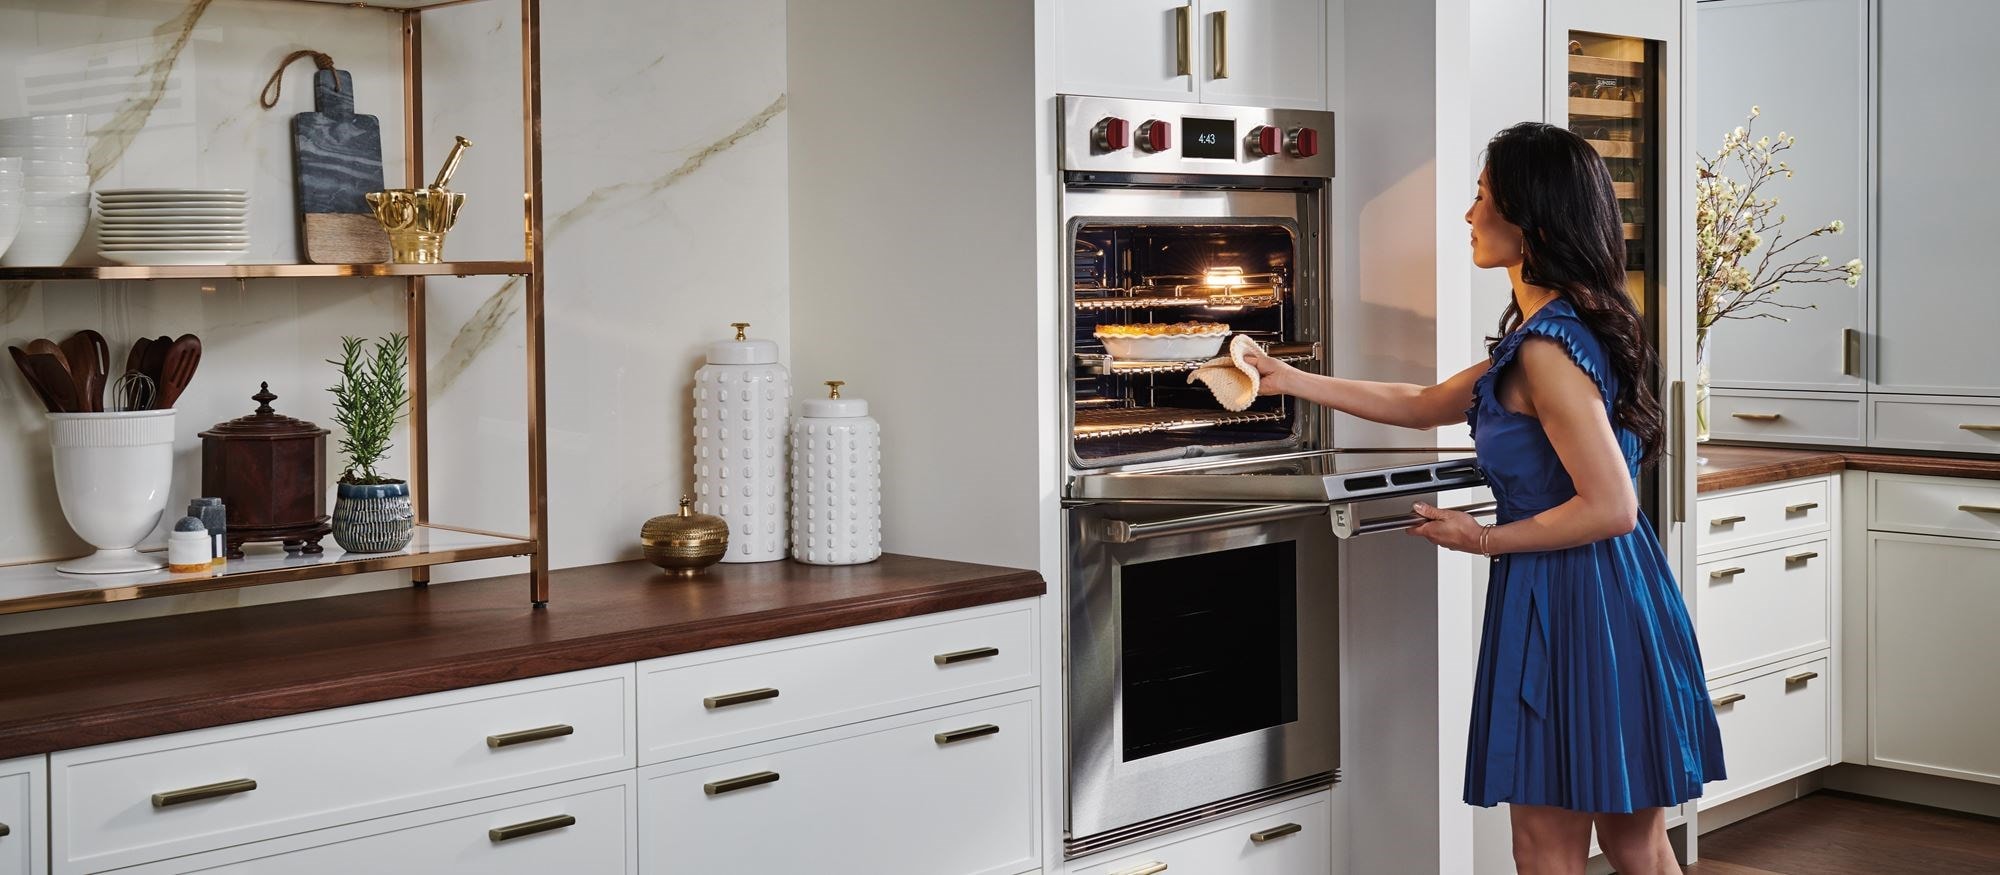 Oven Not Baking Evenly: Causes and Fixes